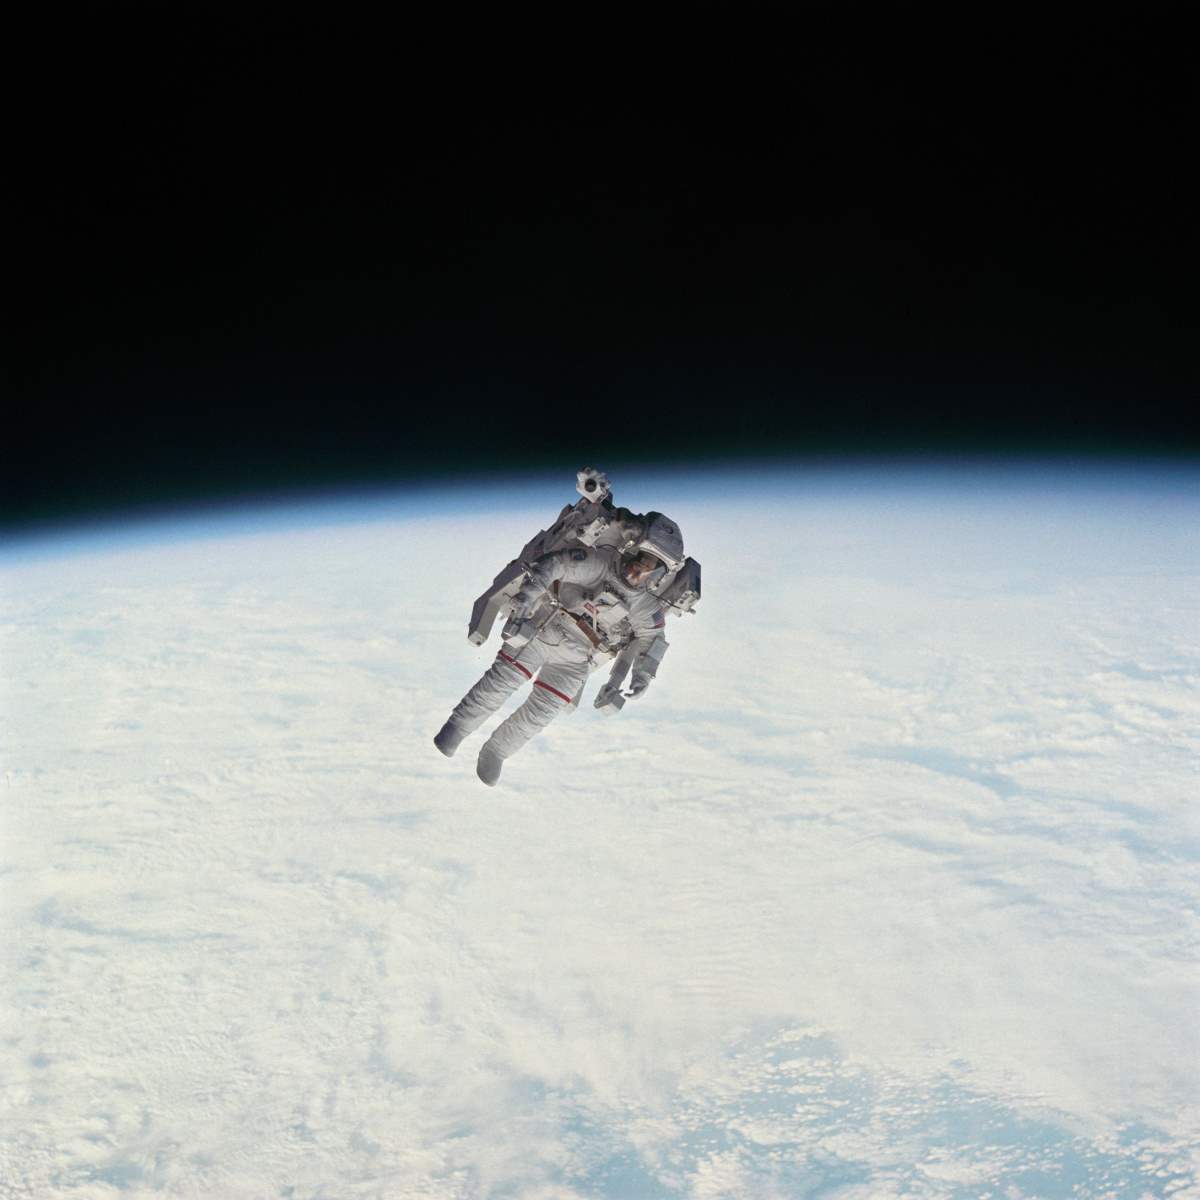 Robert Stewart untethered above the Earth during Manned Maneuvering Unit (MMU) Exercise